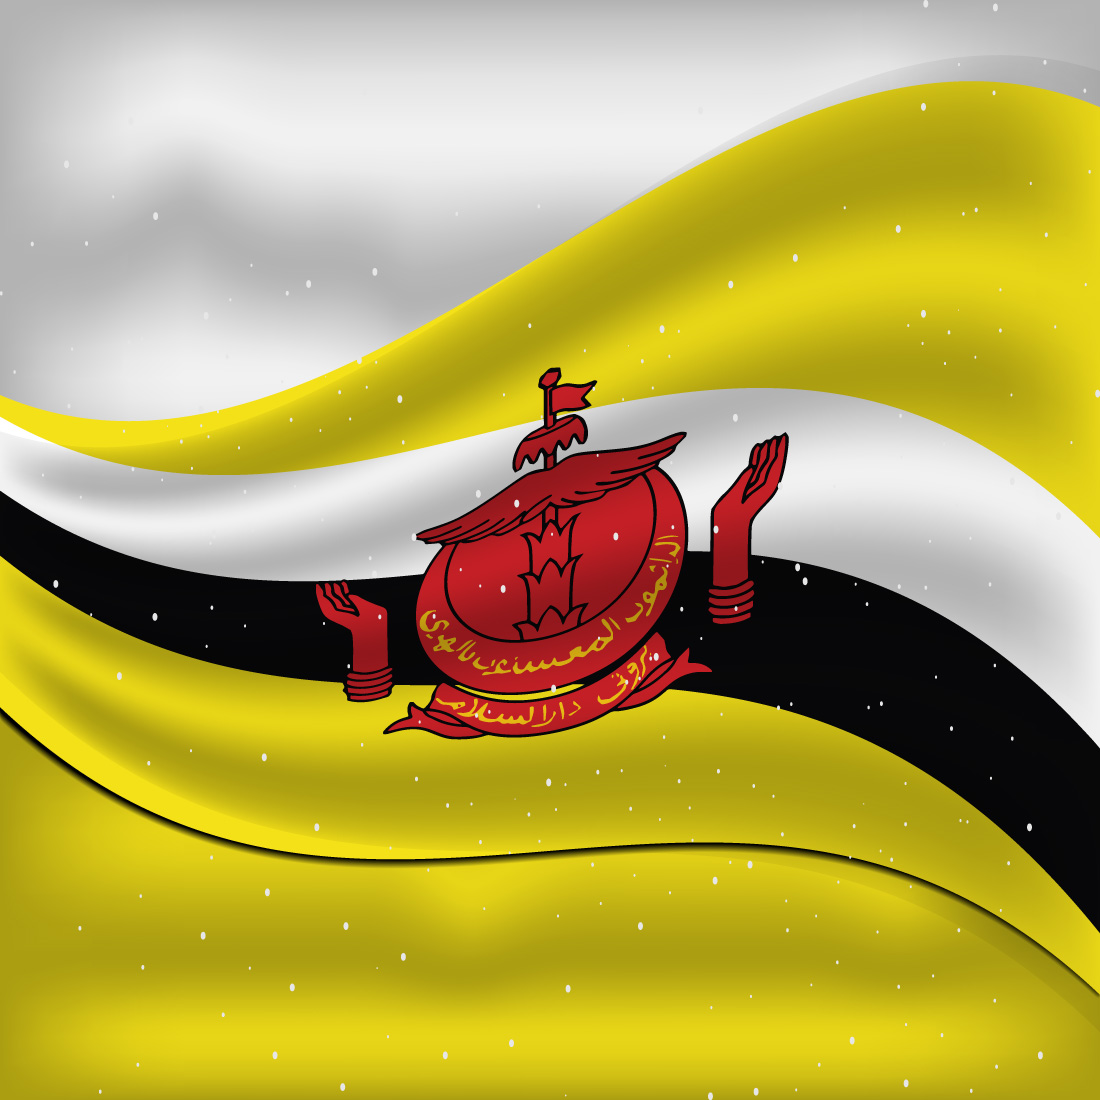 Colorful image of the flag of Brunei.